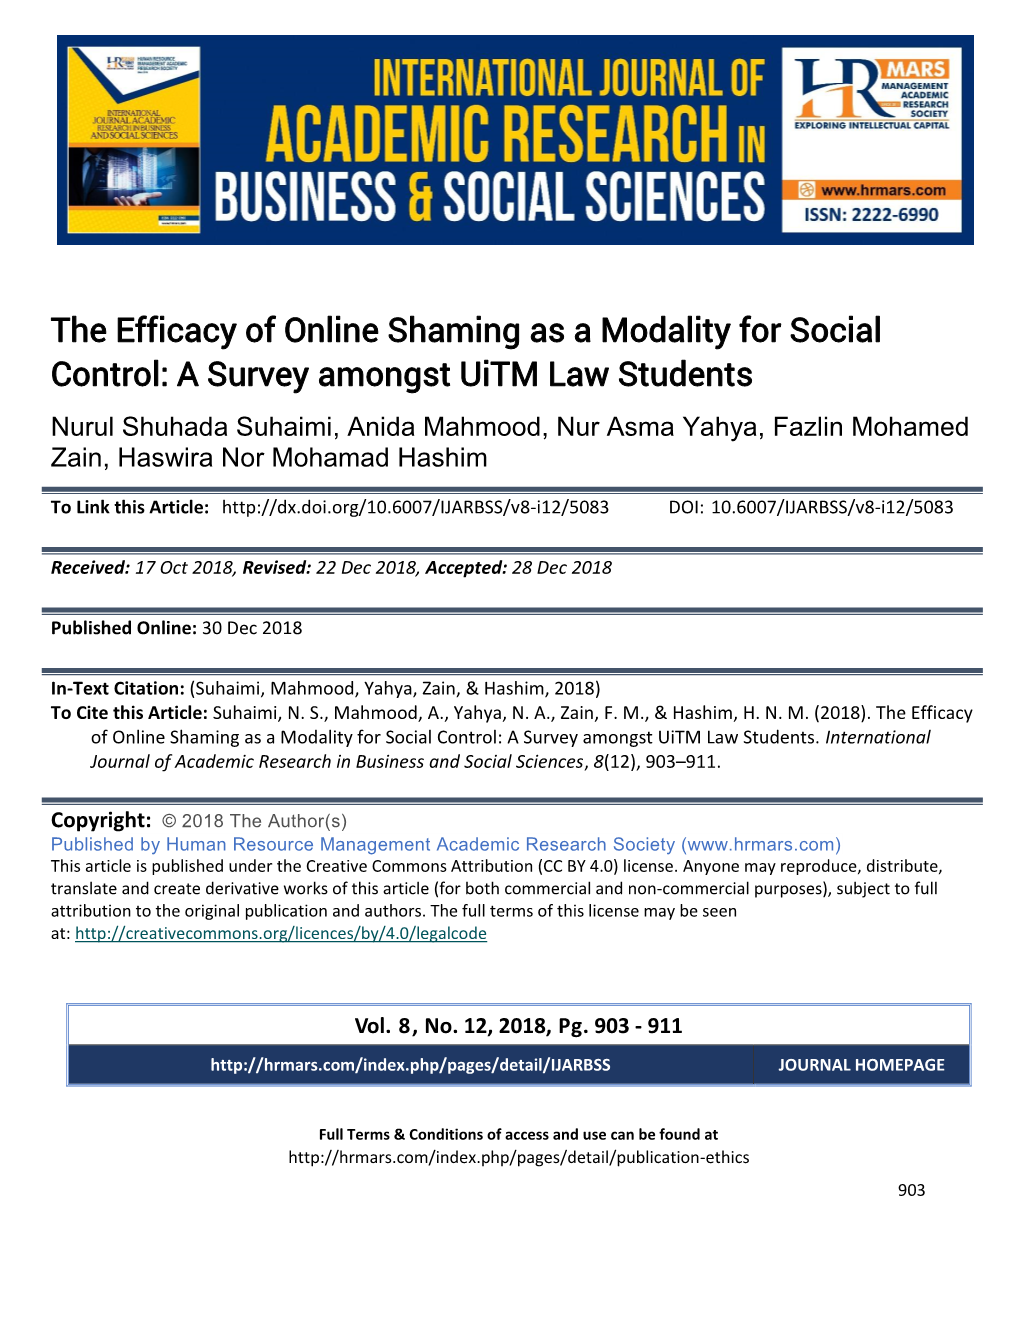 The Efficacy of Online Shaming As a Modality for Social Control: a Survey Amongst Uitm Law Students